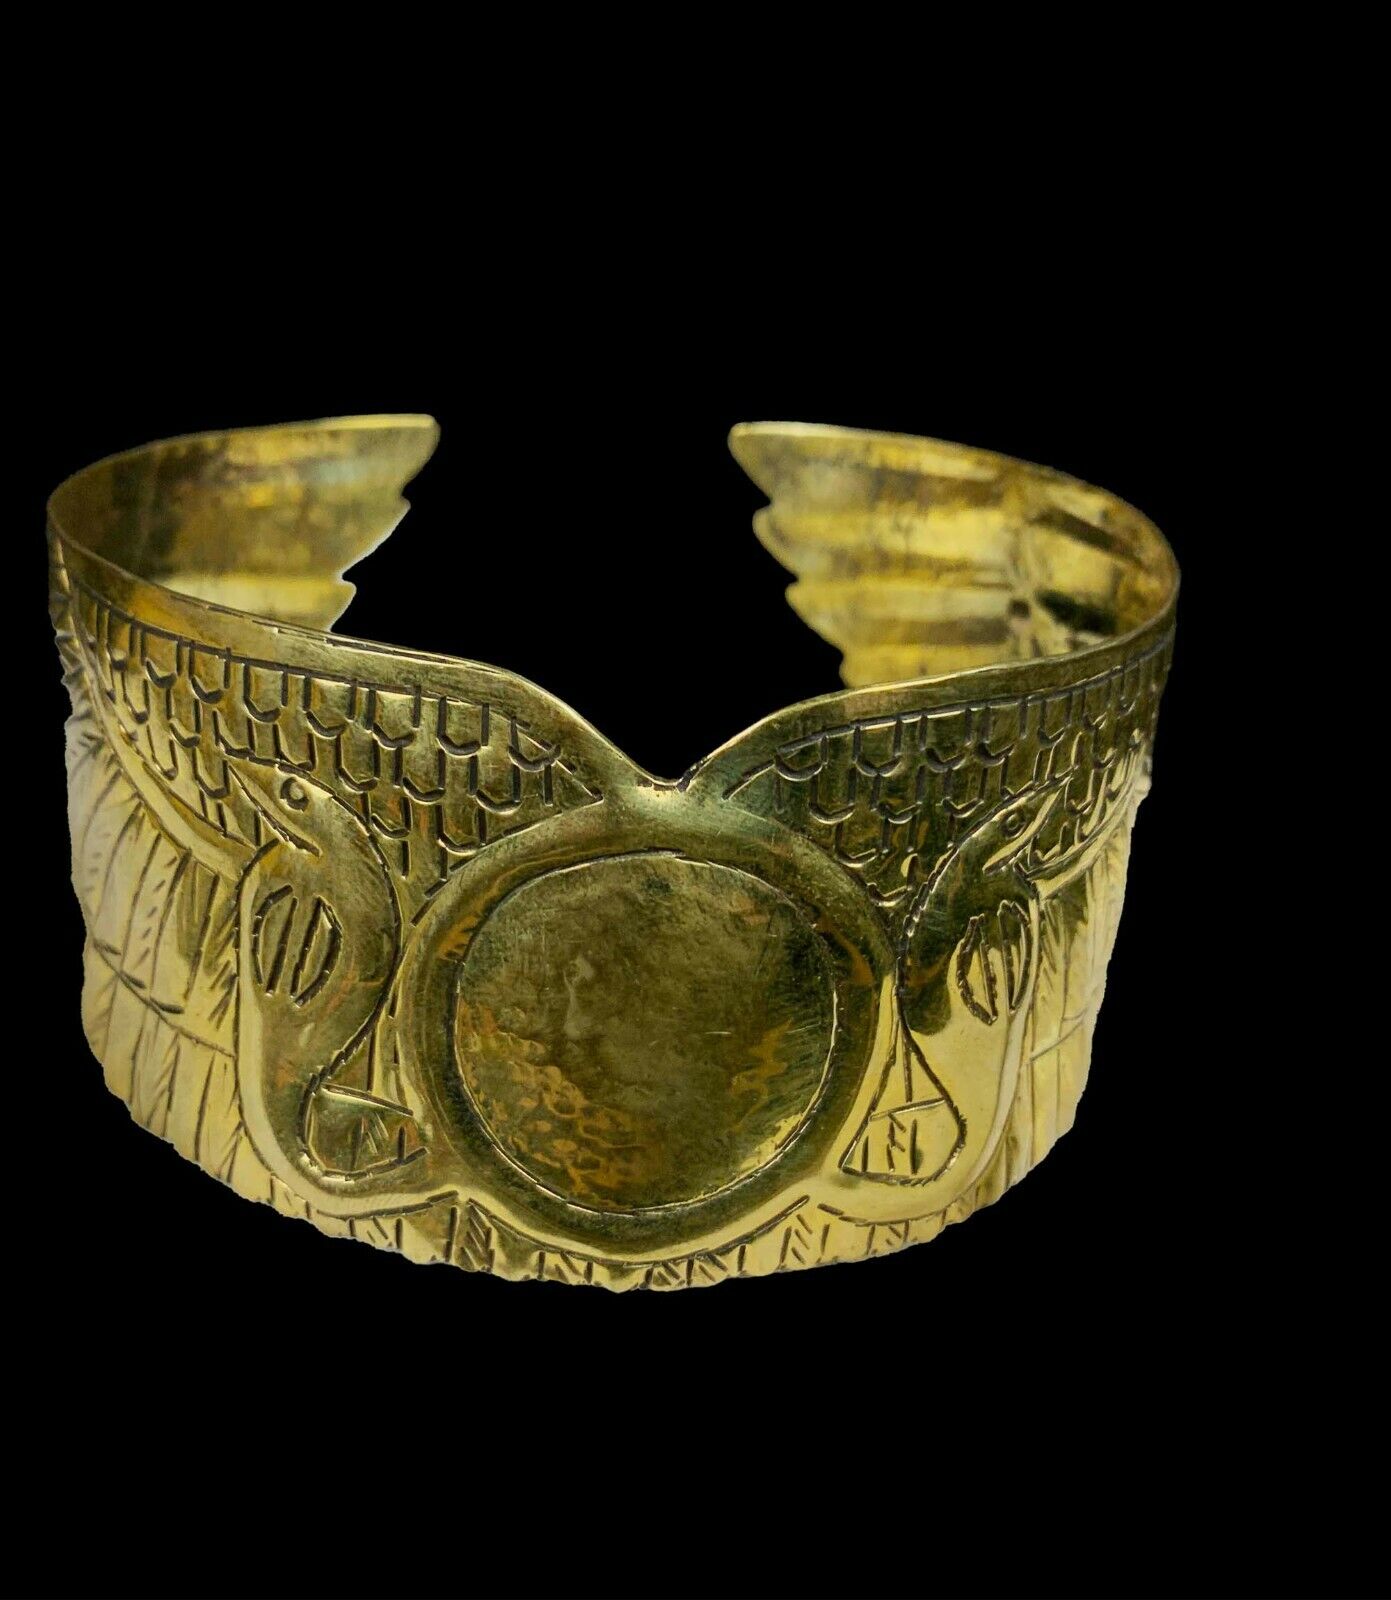 Handmade Egyptian arm cuff of the sun one of the oldest symbols on earth